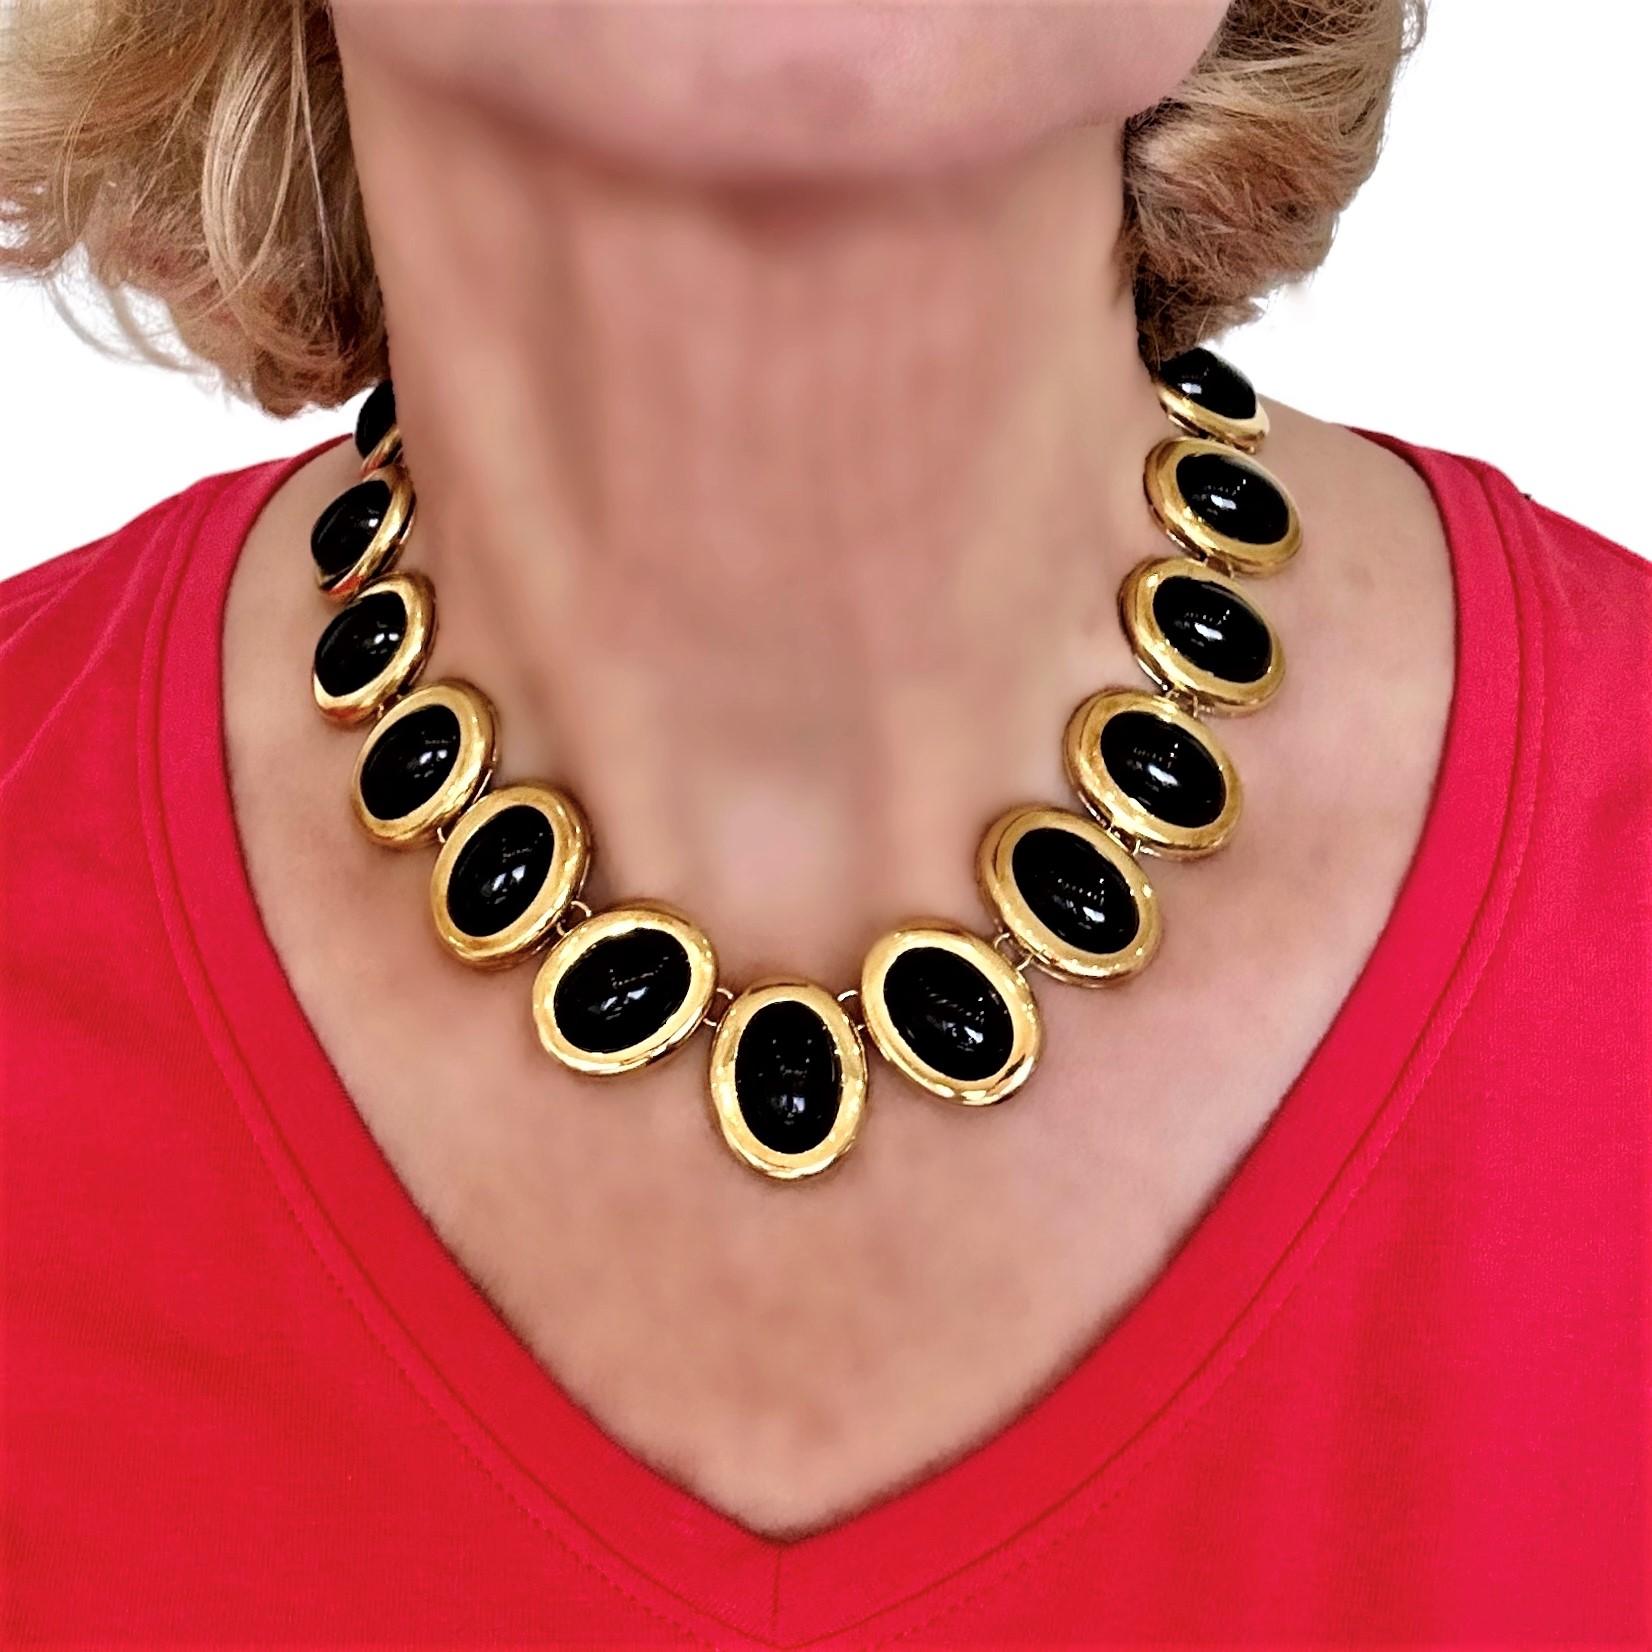 Stylish Mid-20th Century 18K Yellow Gold and Black Onyx Choker Length Necklace In Good Condition For Sale In Palm Beach, FL